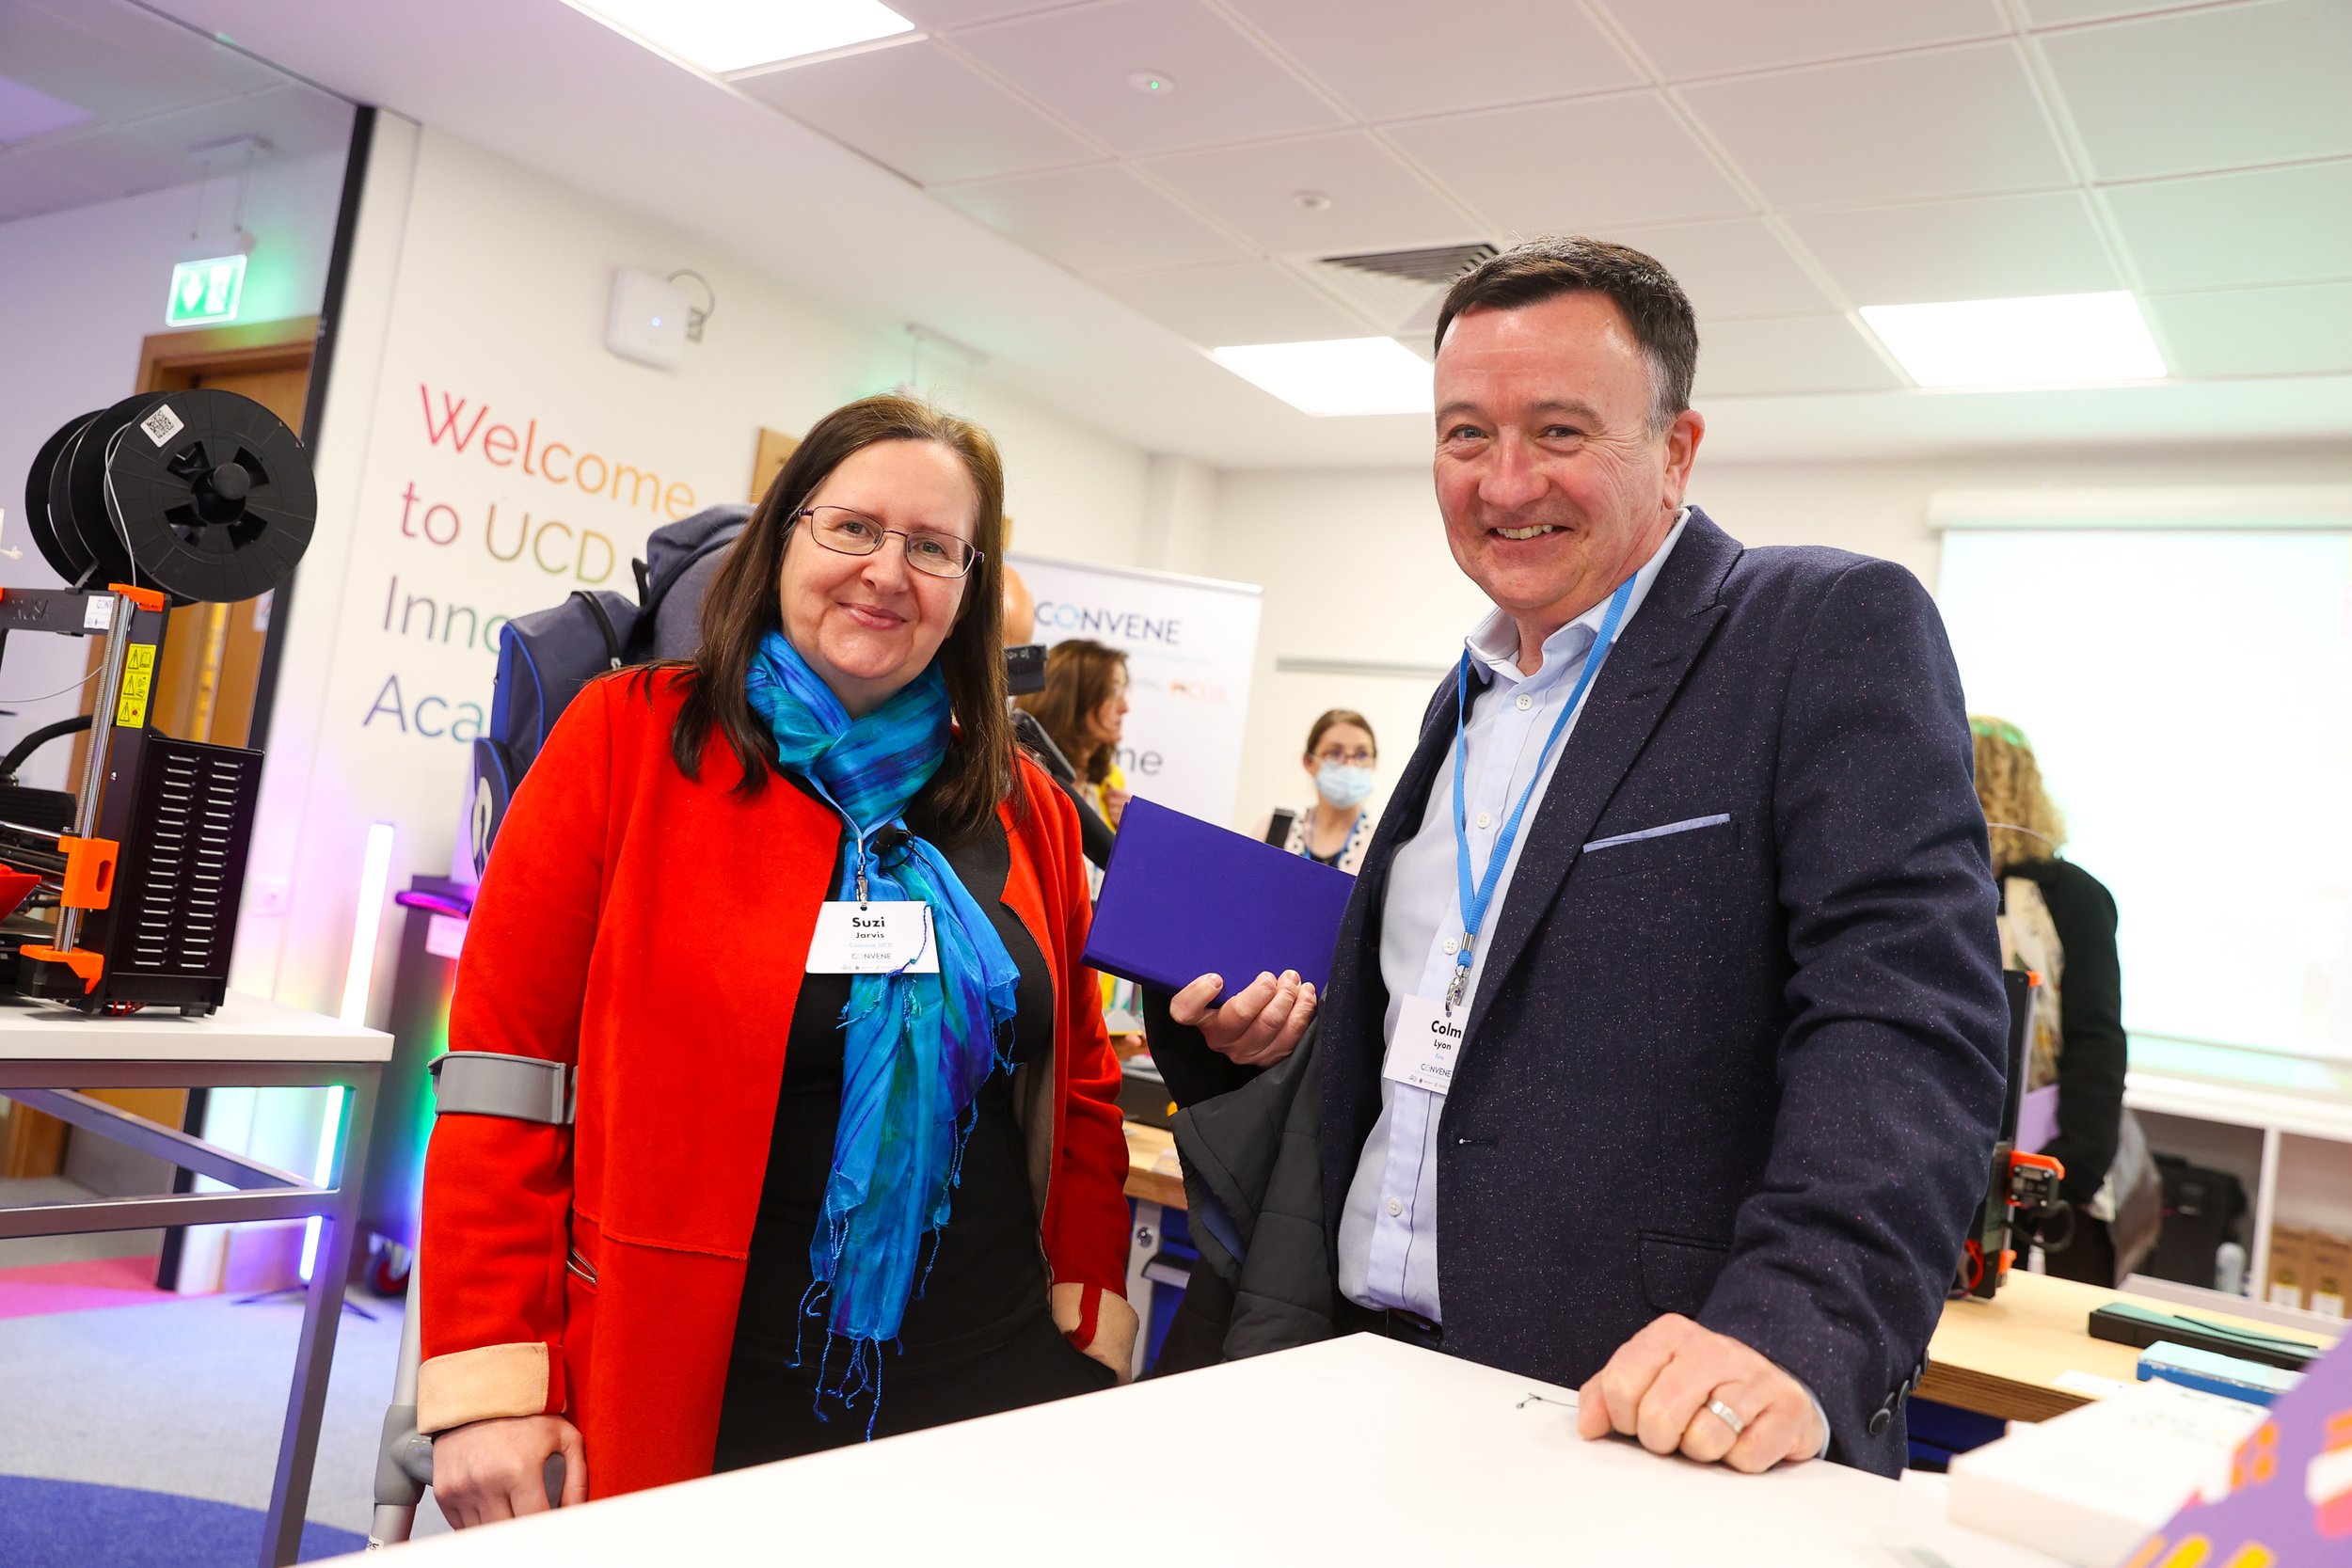  Prof Suzi Jarvis, founding director of UCD Innovation Academy, and Colm Lyon, CEO and Founder of FIRE and UCD Innovation Academy international advisory board member. 